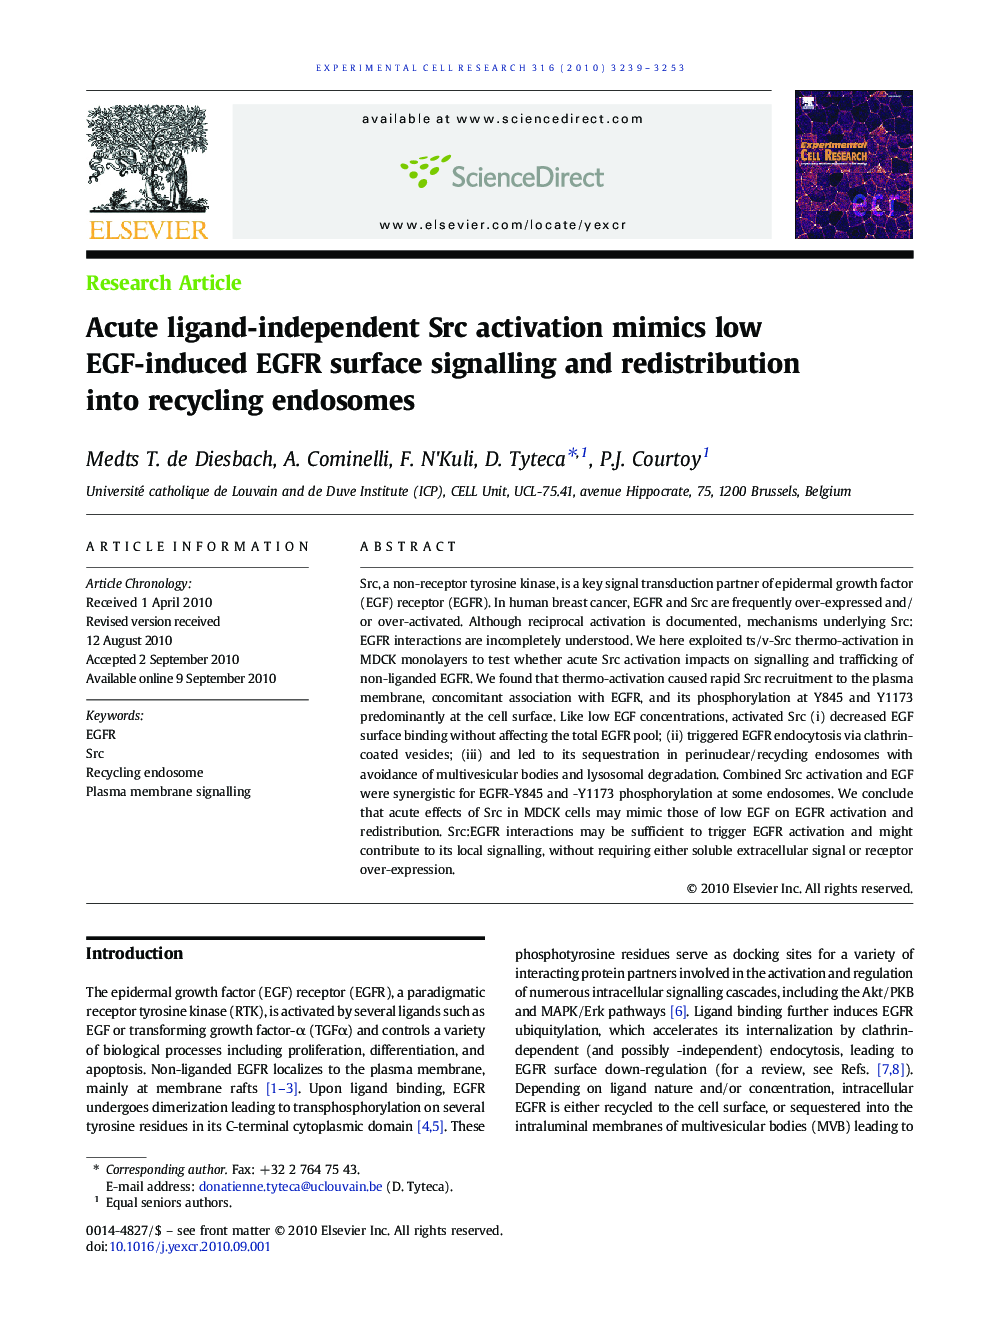 Acute ligand-independent Src activation mimics low EGF-induced EGFR surface signalling and redistribution into recycling endosomes